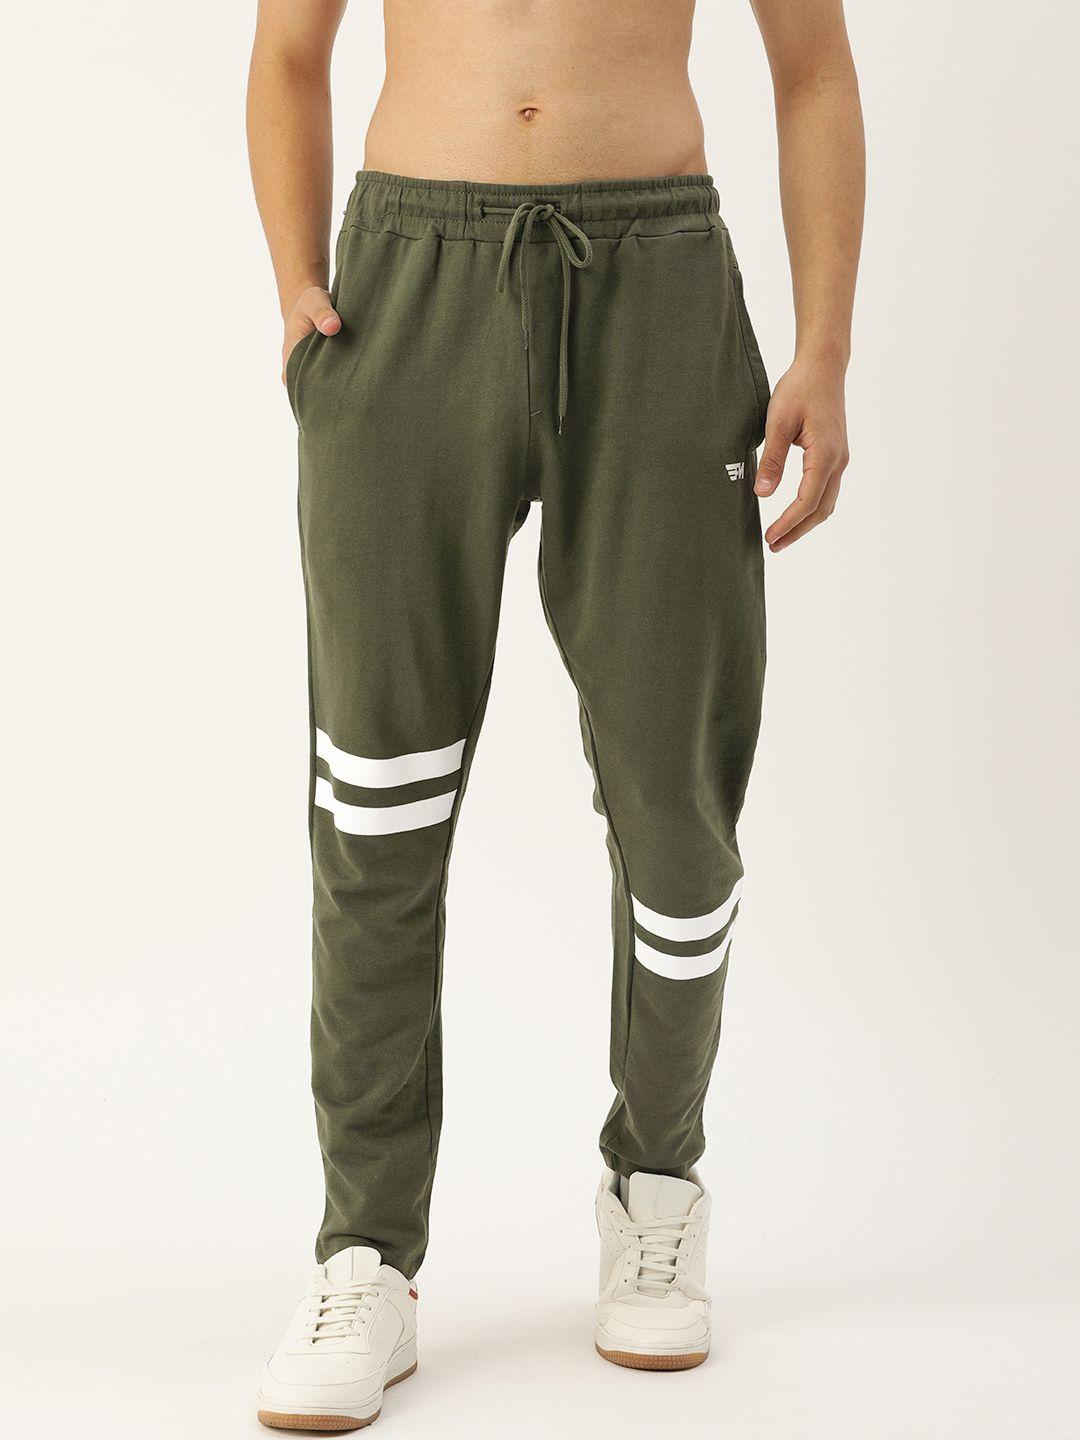 flying machine men olive green solid track pants with striped detail